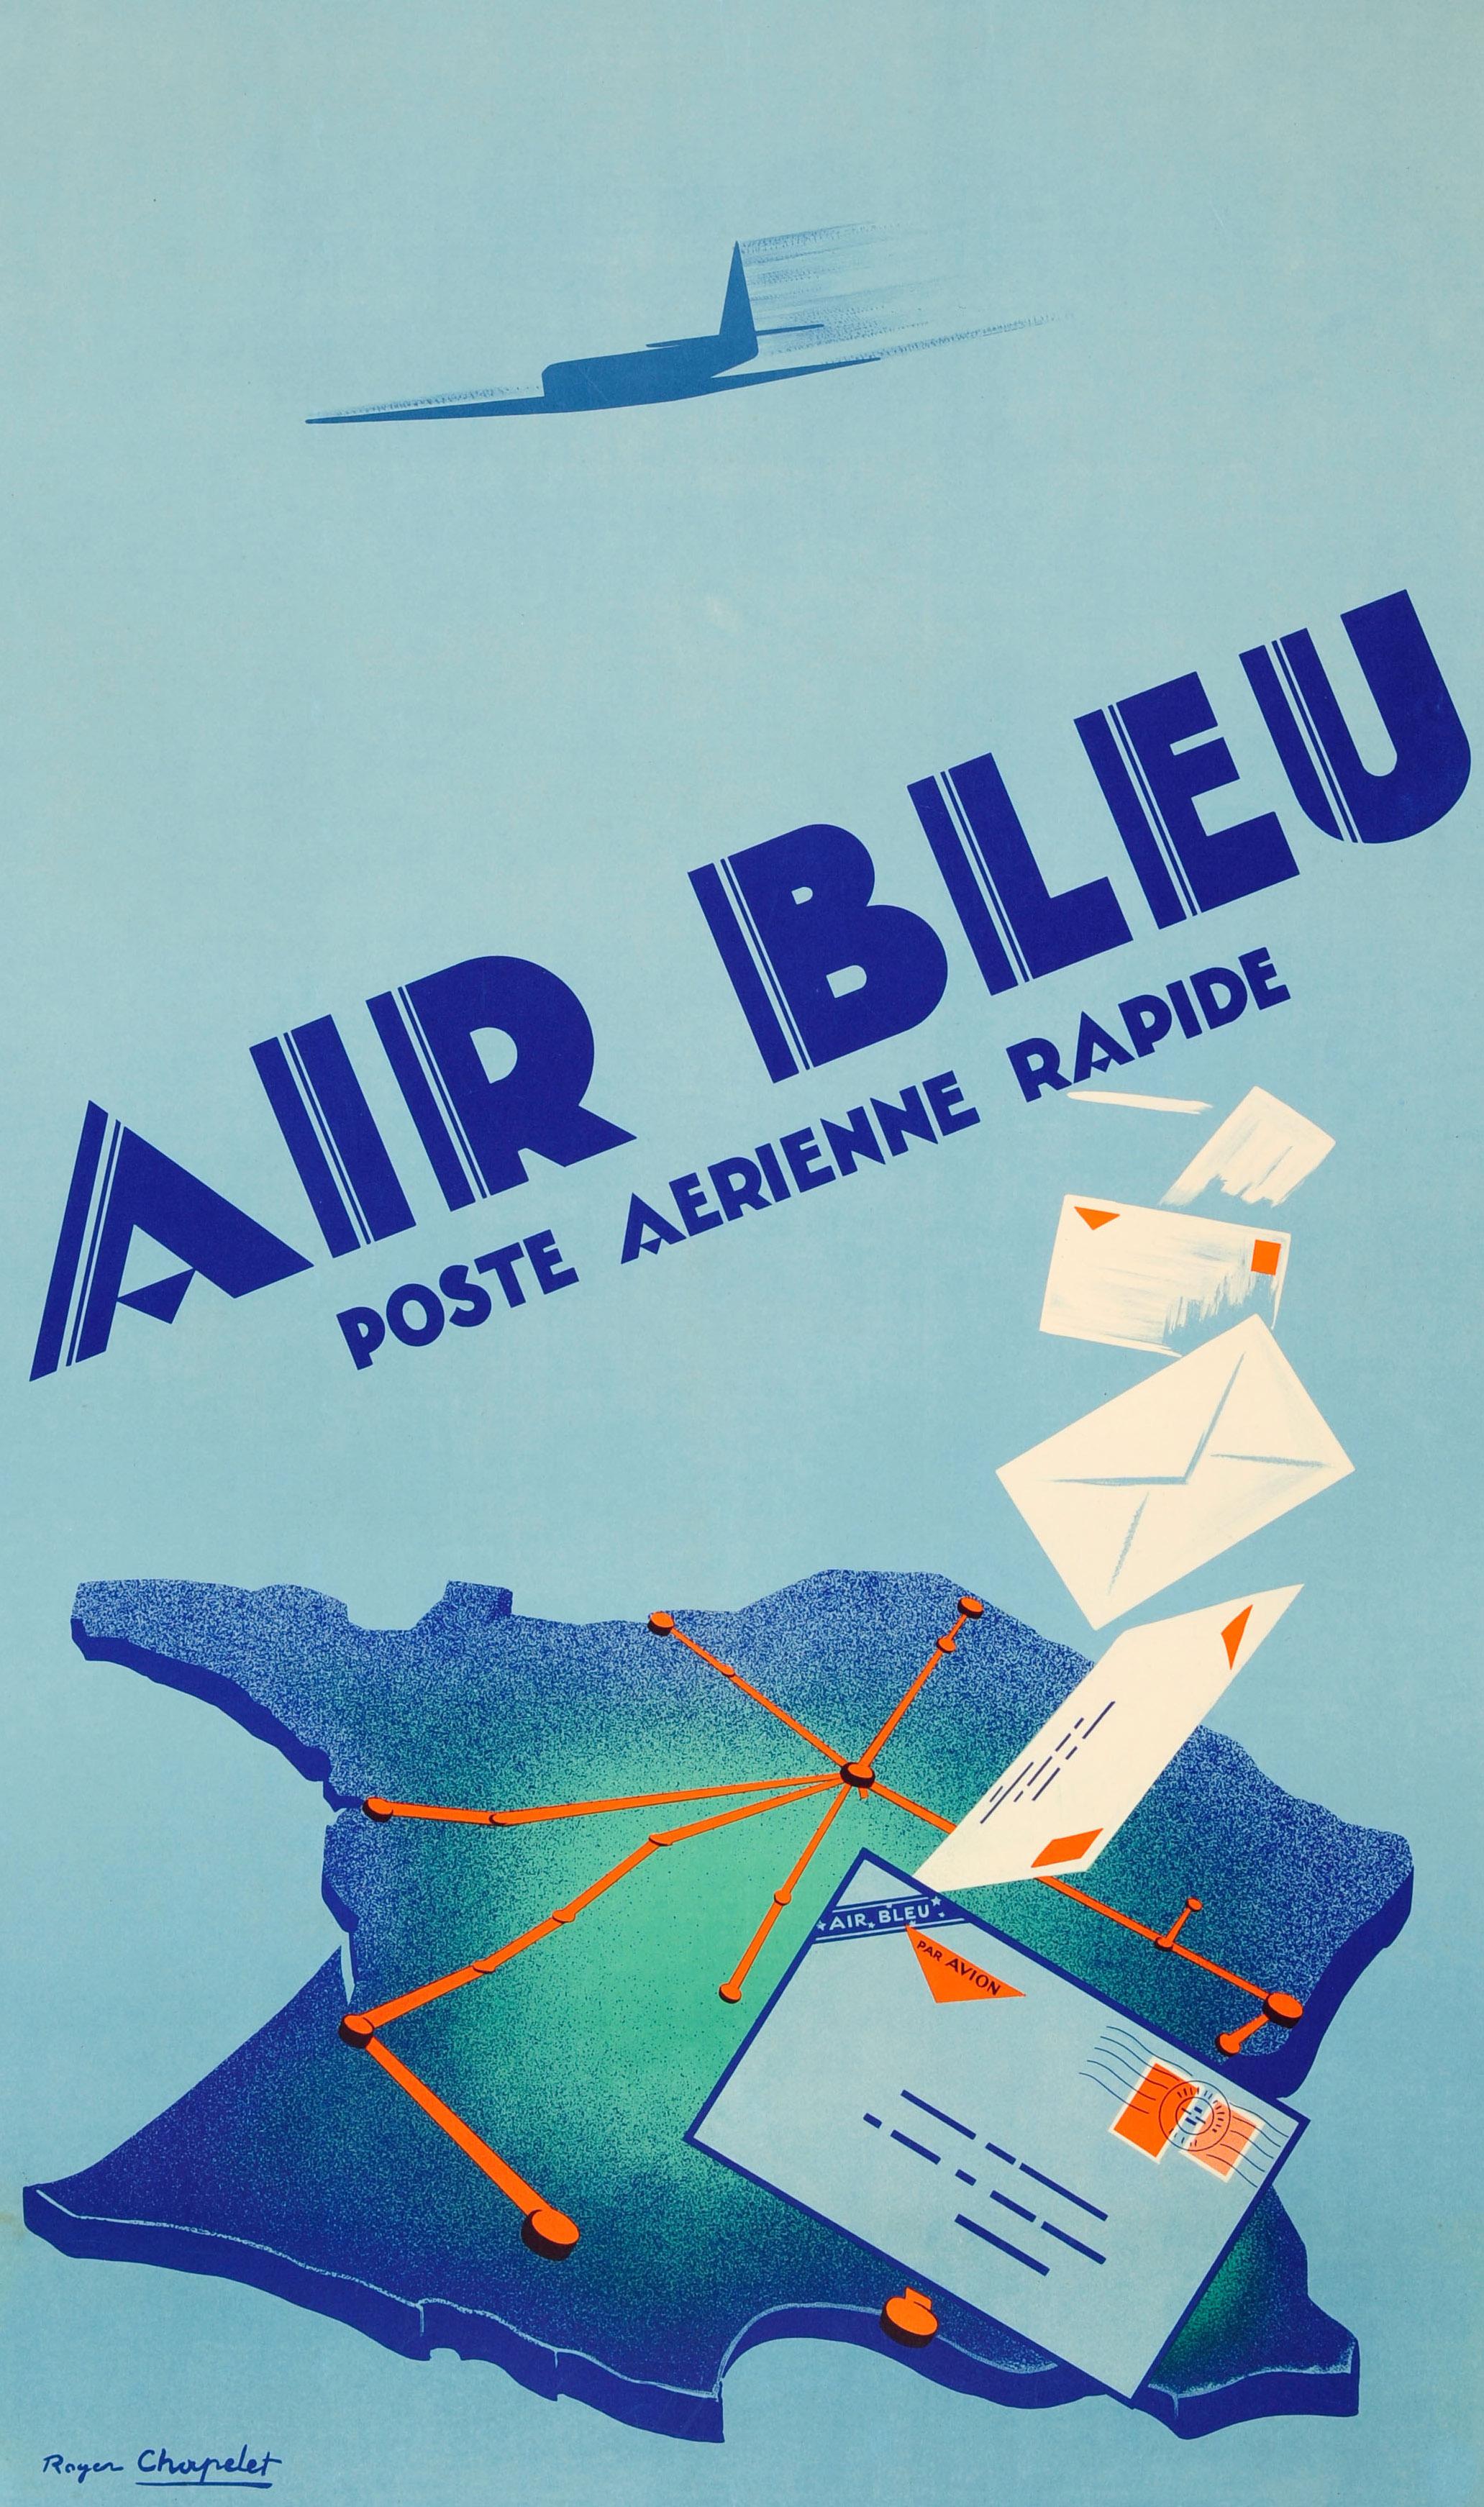 Original vintage advertising poster for the express air delivery service by Air Bleu poste aerienne rapide. Fantastic Art Deco design by the French artist Roger Chapelet (1903-1995) featuring a plane flying at speed over a route map of France with